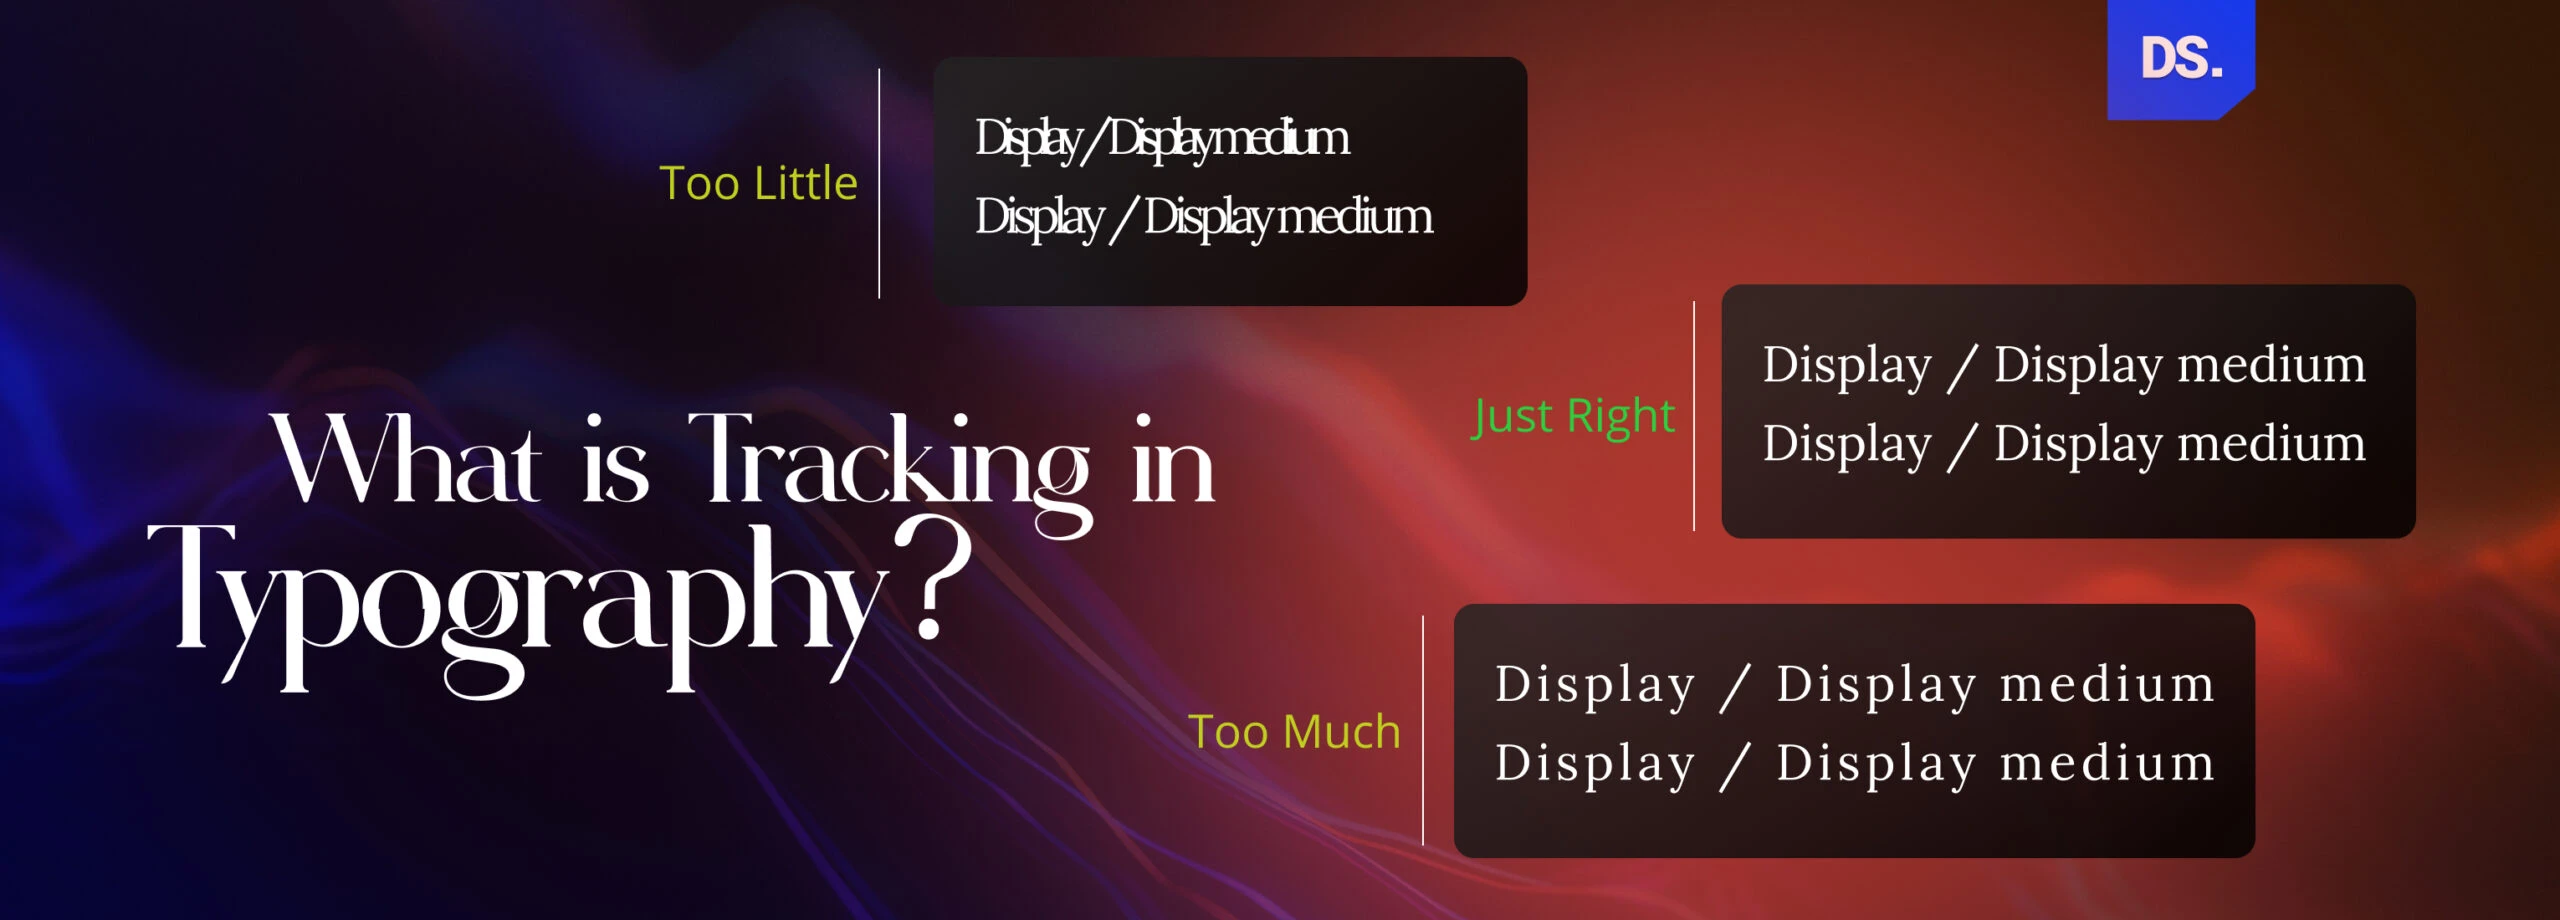 What is Tracking in Typography?